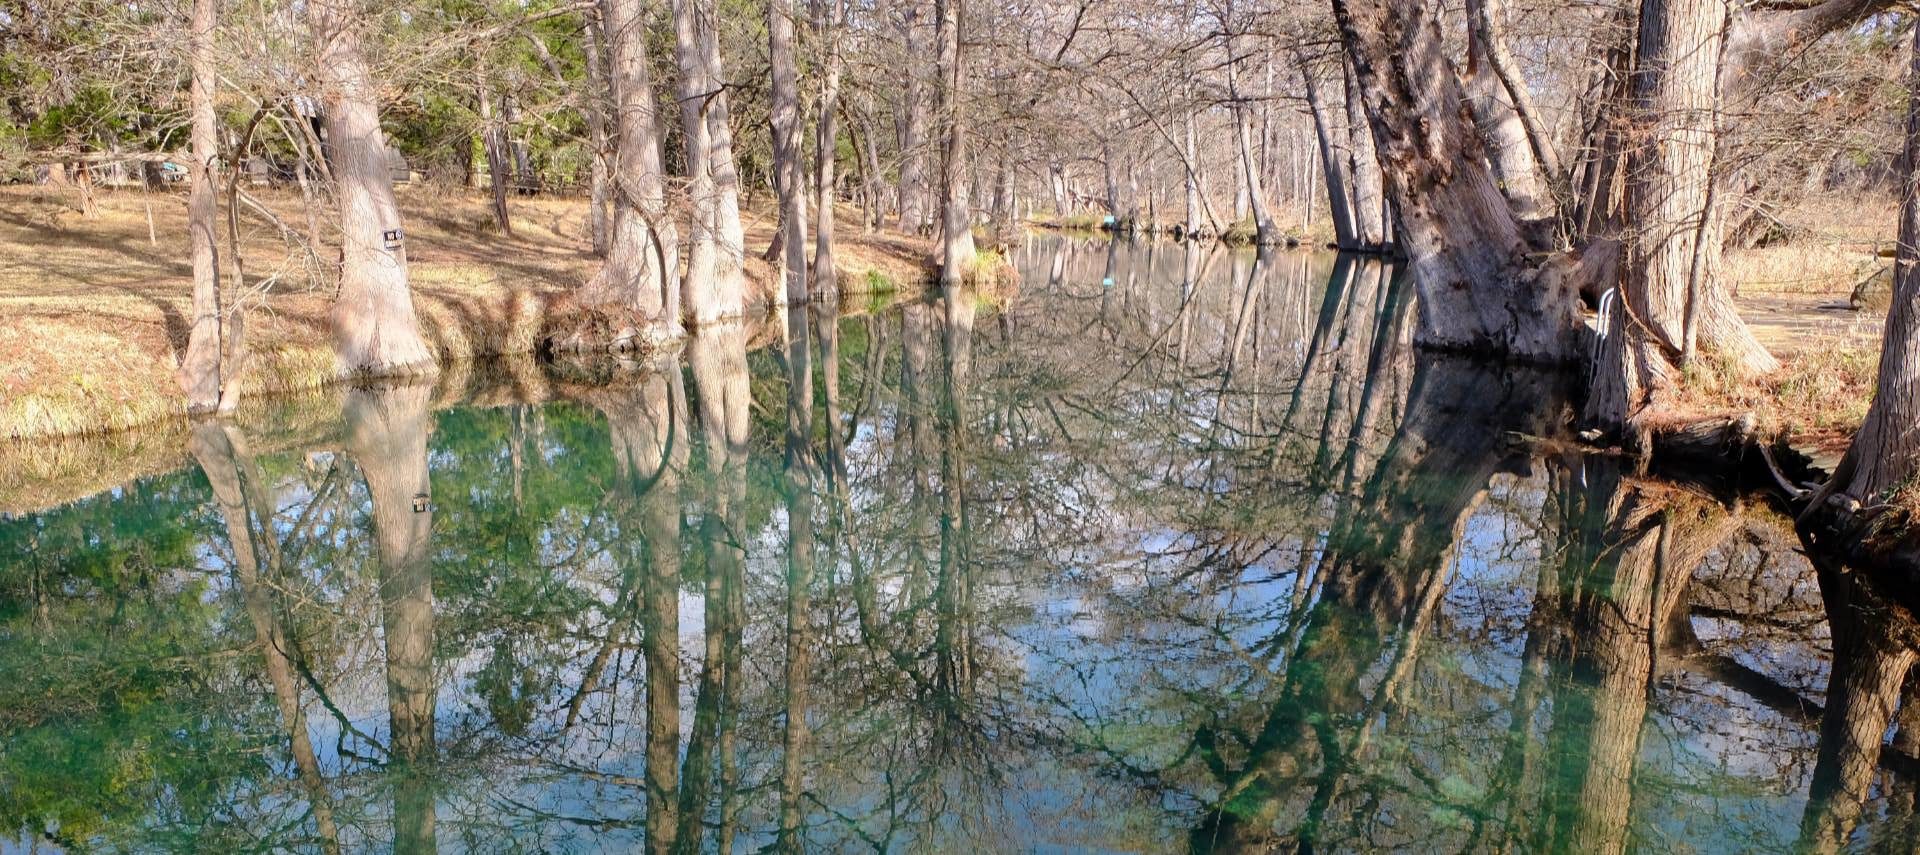 Close up view of water in a creek surrounded by many trees all reflecting in the water